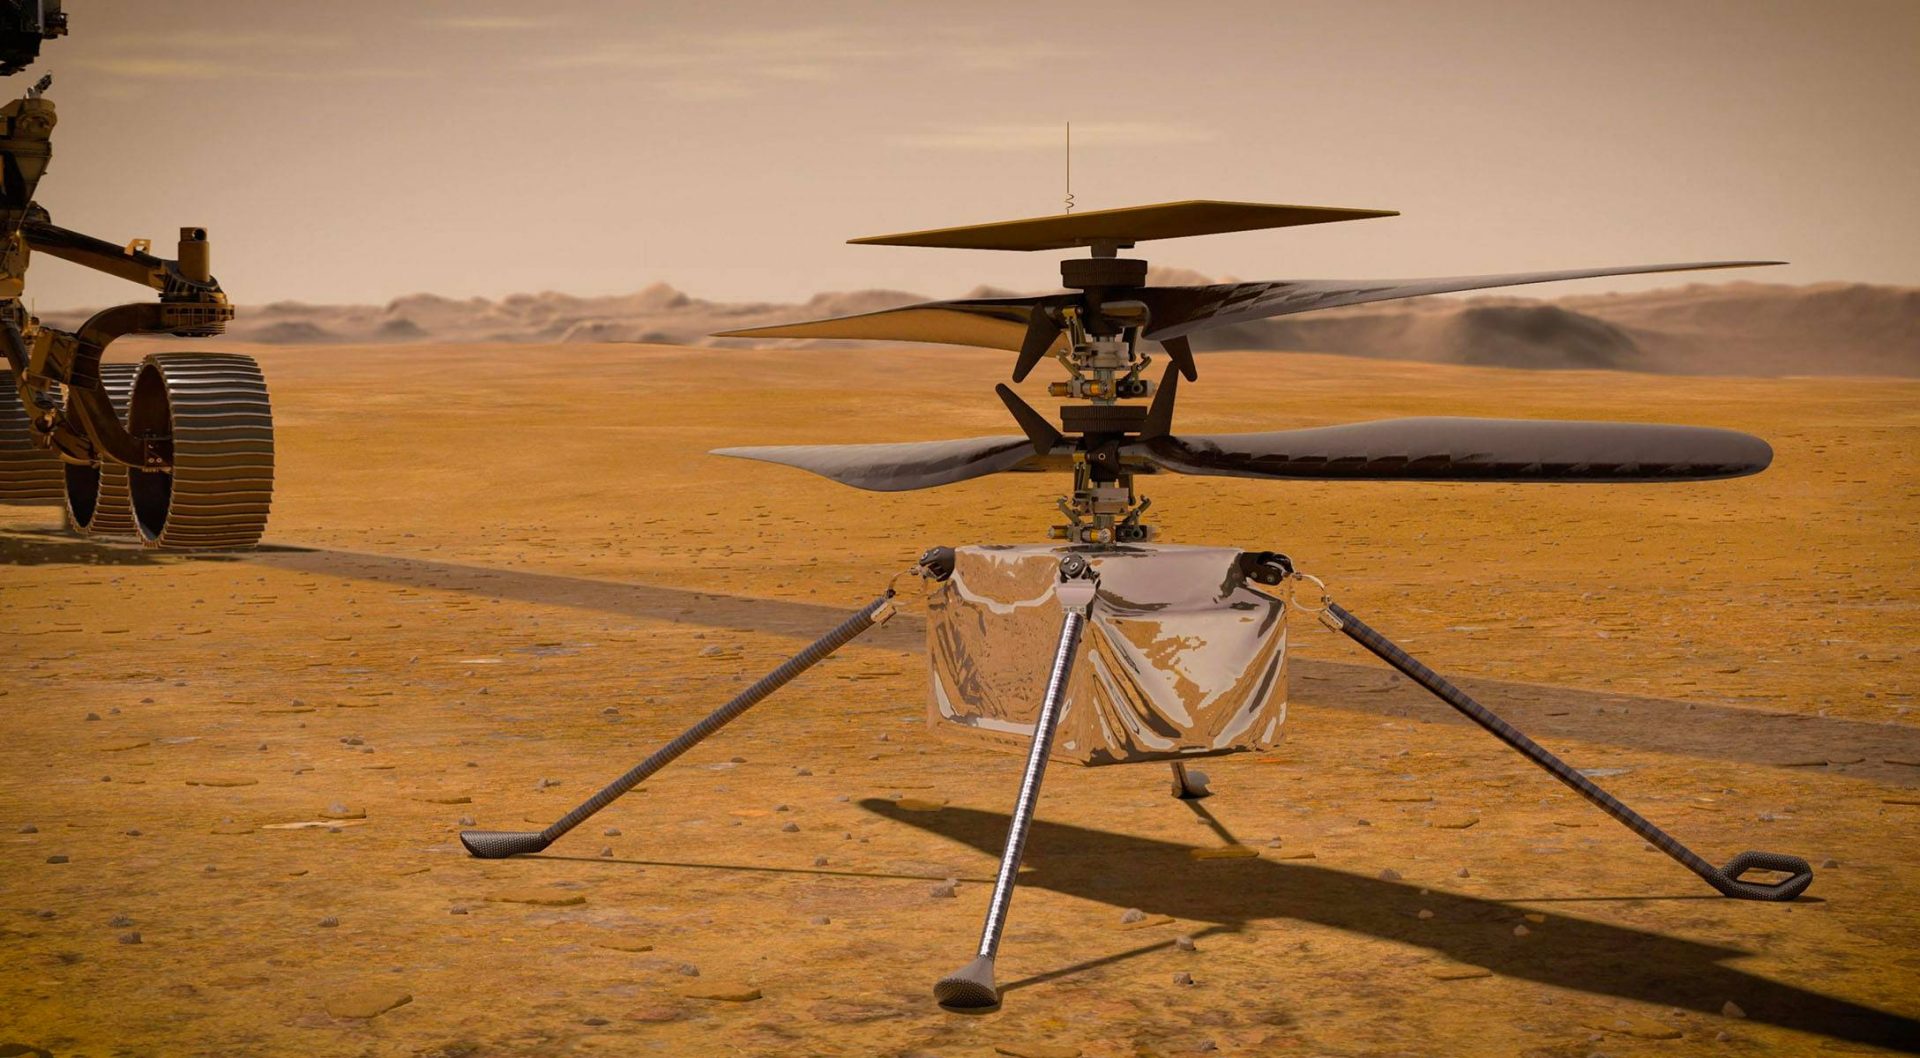 The Mars Ingenuity helicopter refused to purchase its fourth flight